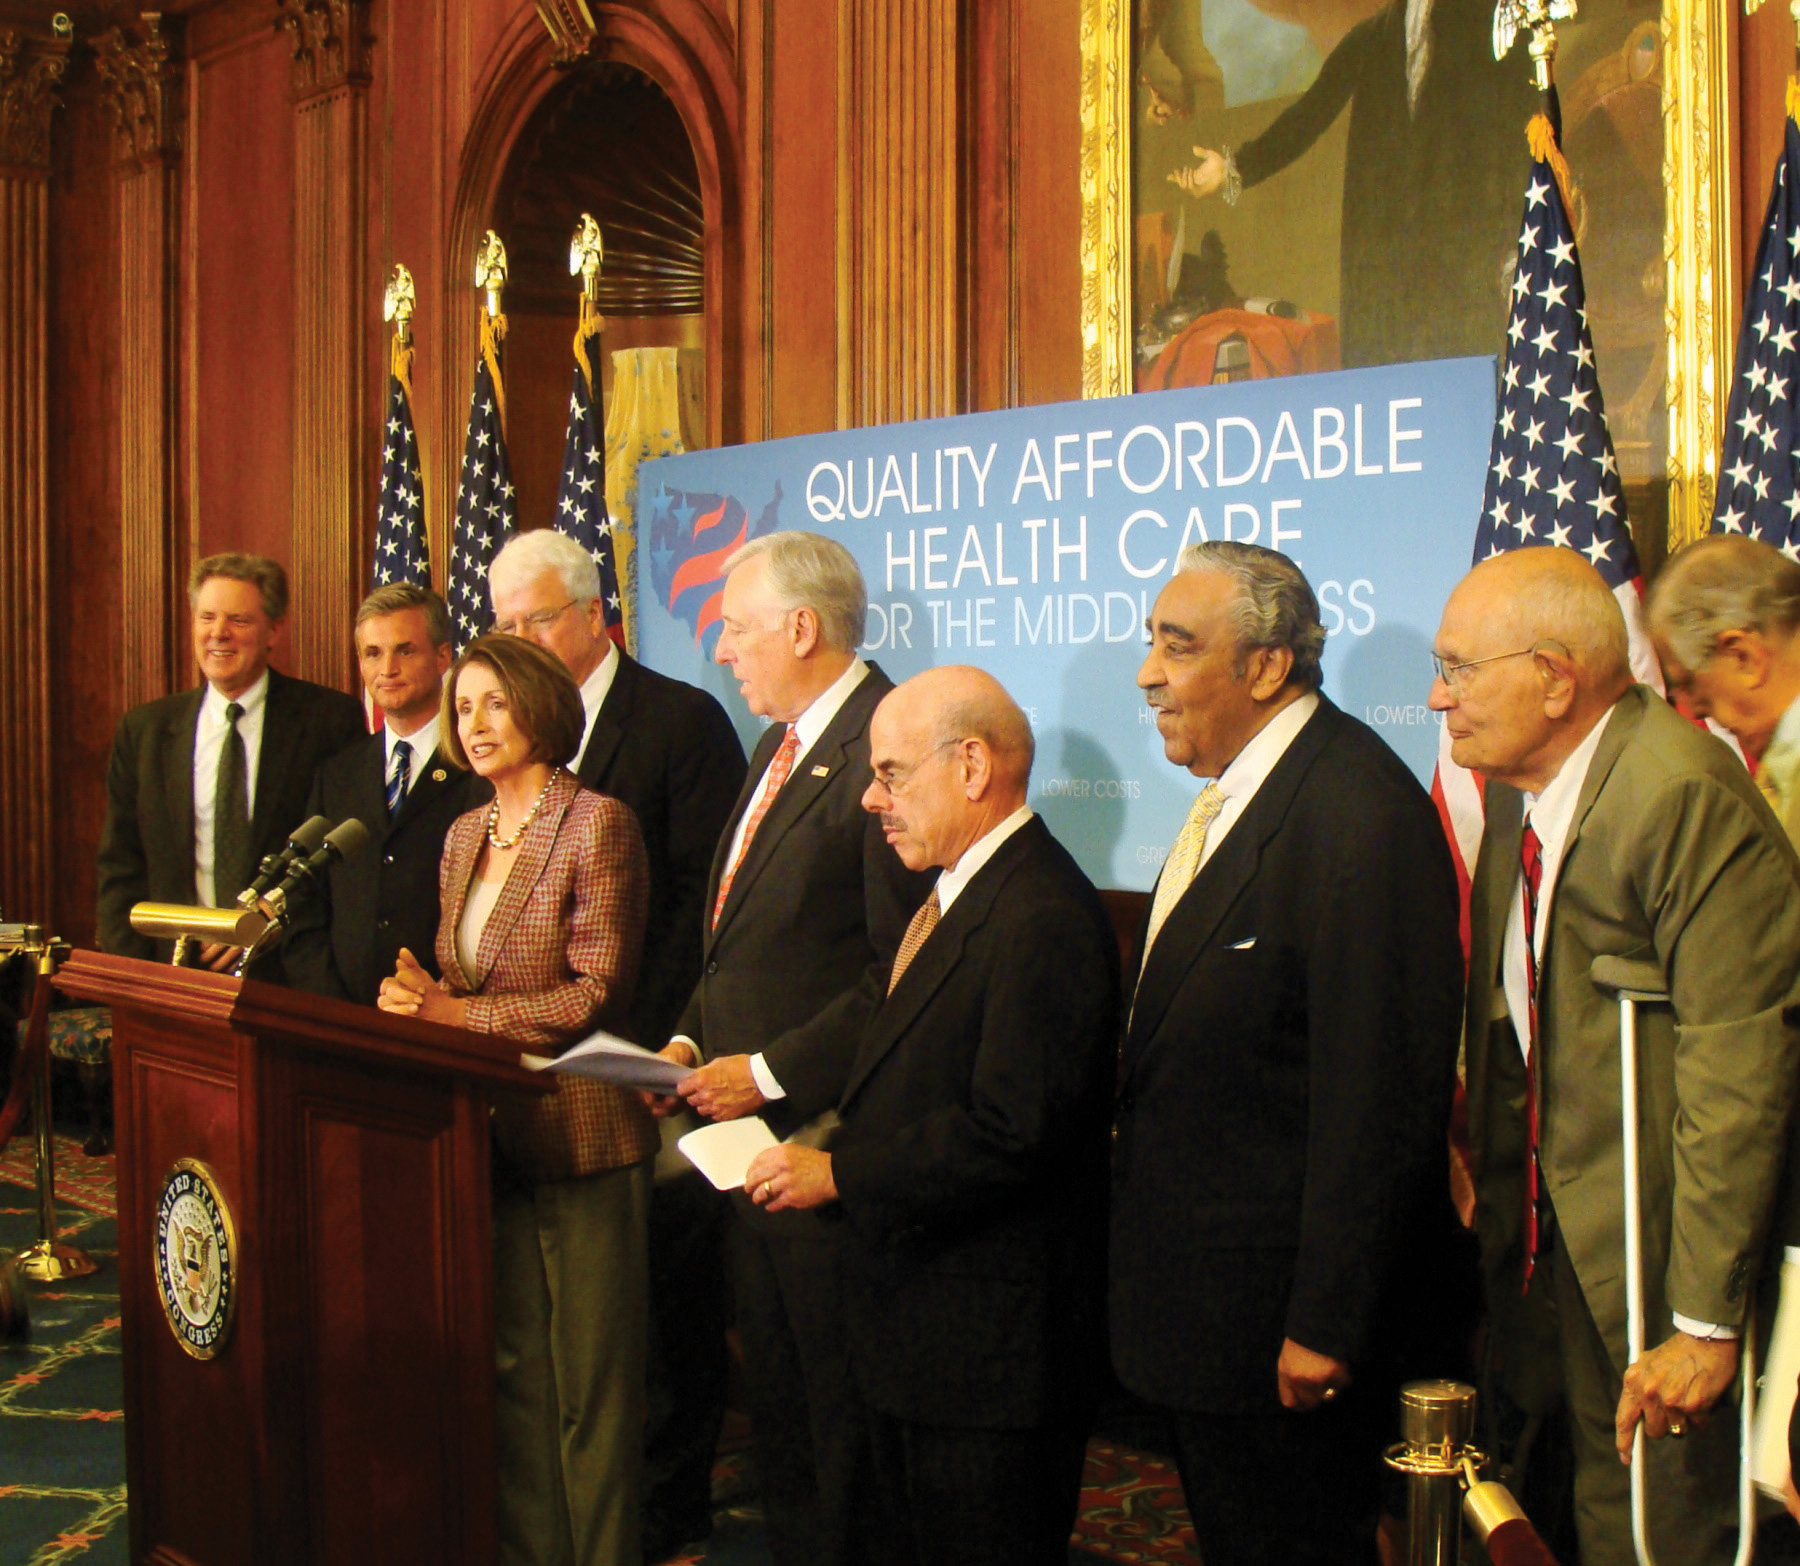 Photo of Nancy Pelosi at a podium, flanked by members of the House.